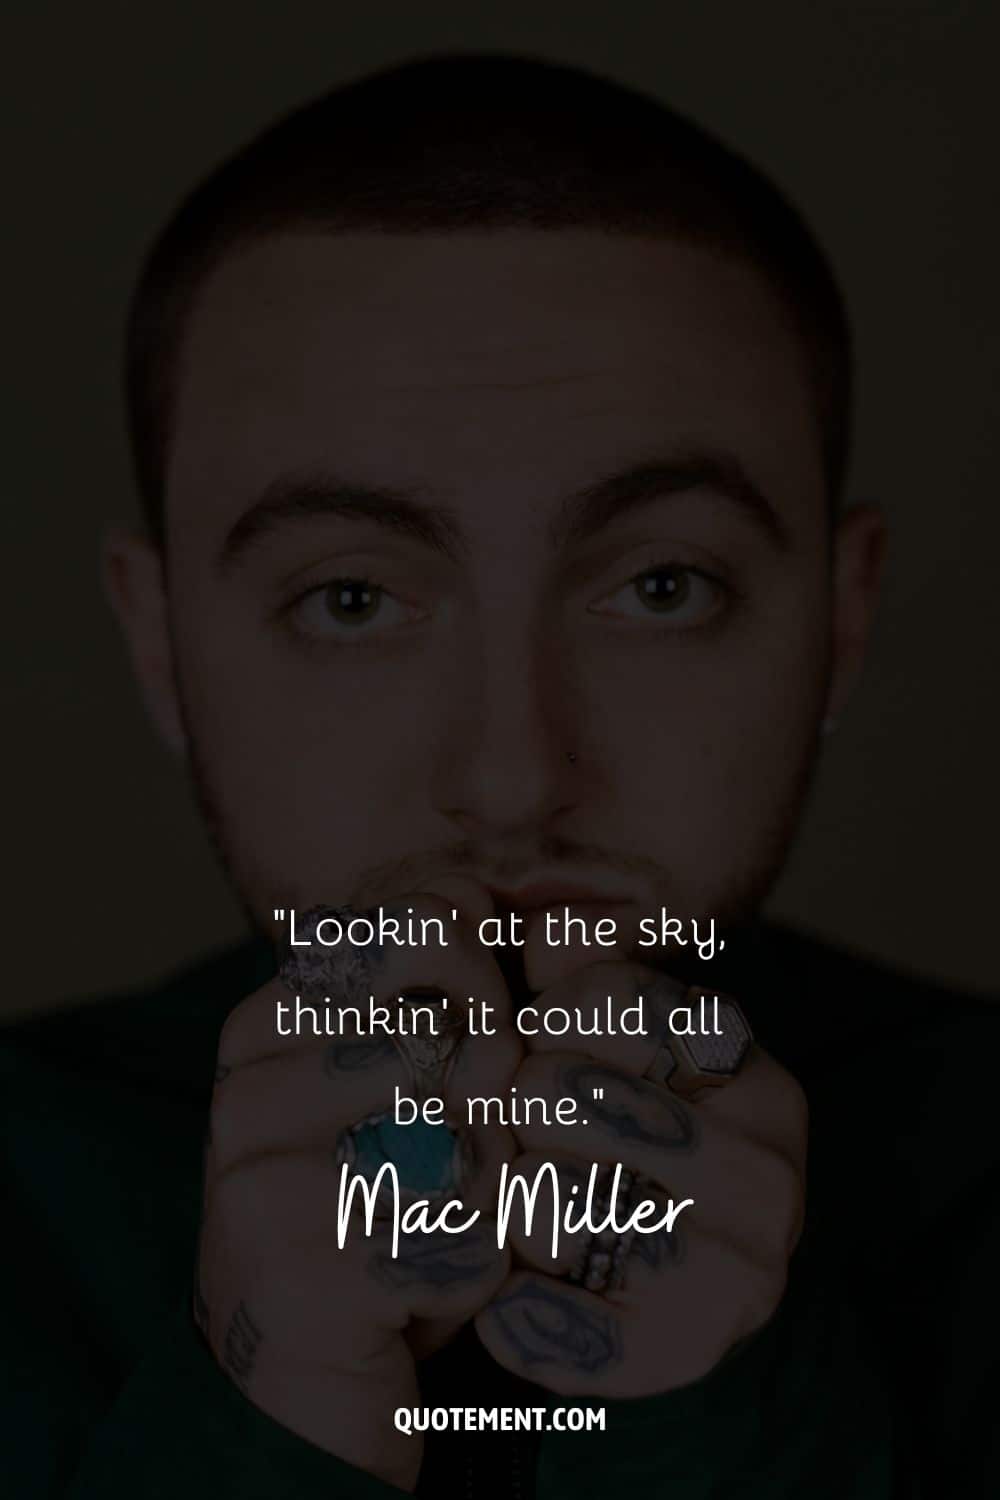 “Lookin' at the sky, thinkin' it could all be mine.” – Mac Miller